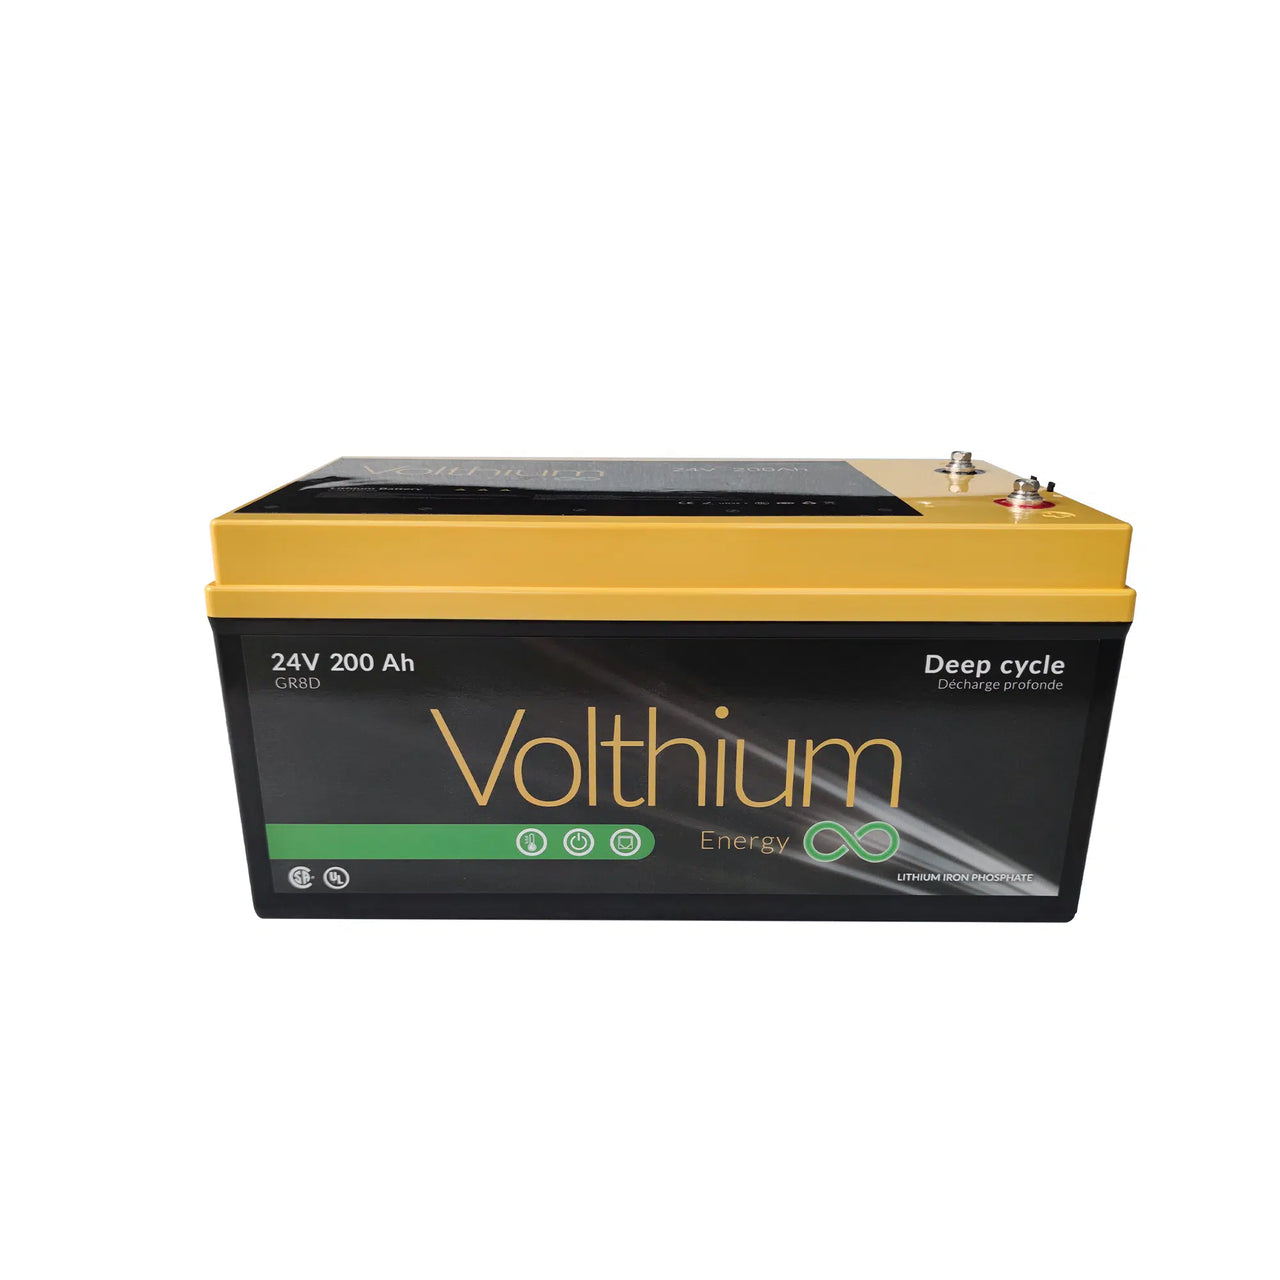 Volthium - Battery 24V 200AH ABS Self-heating 5.12KWH - 25.6-200-G8DY-CH20